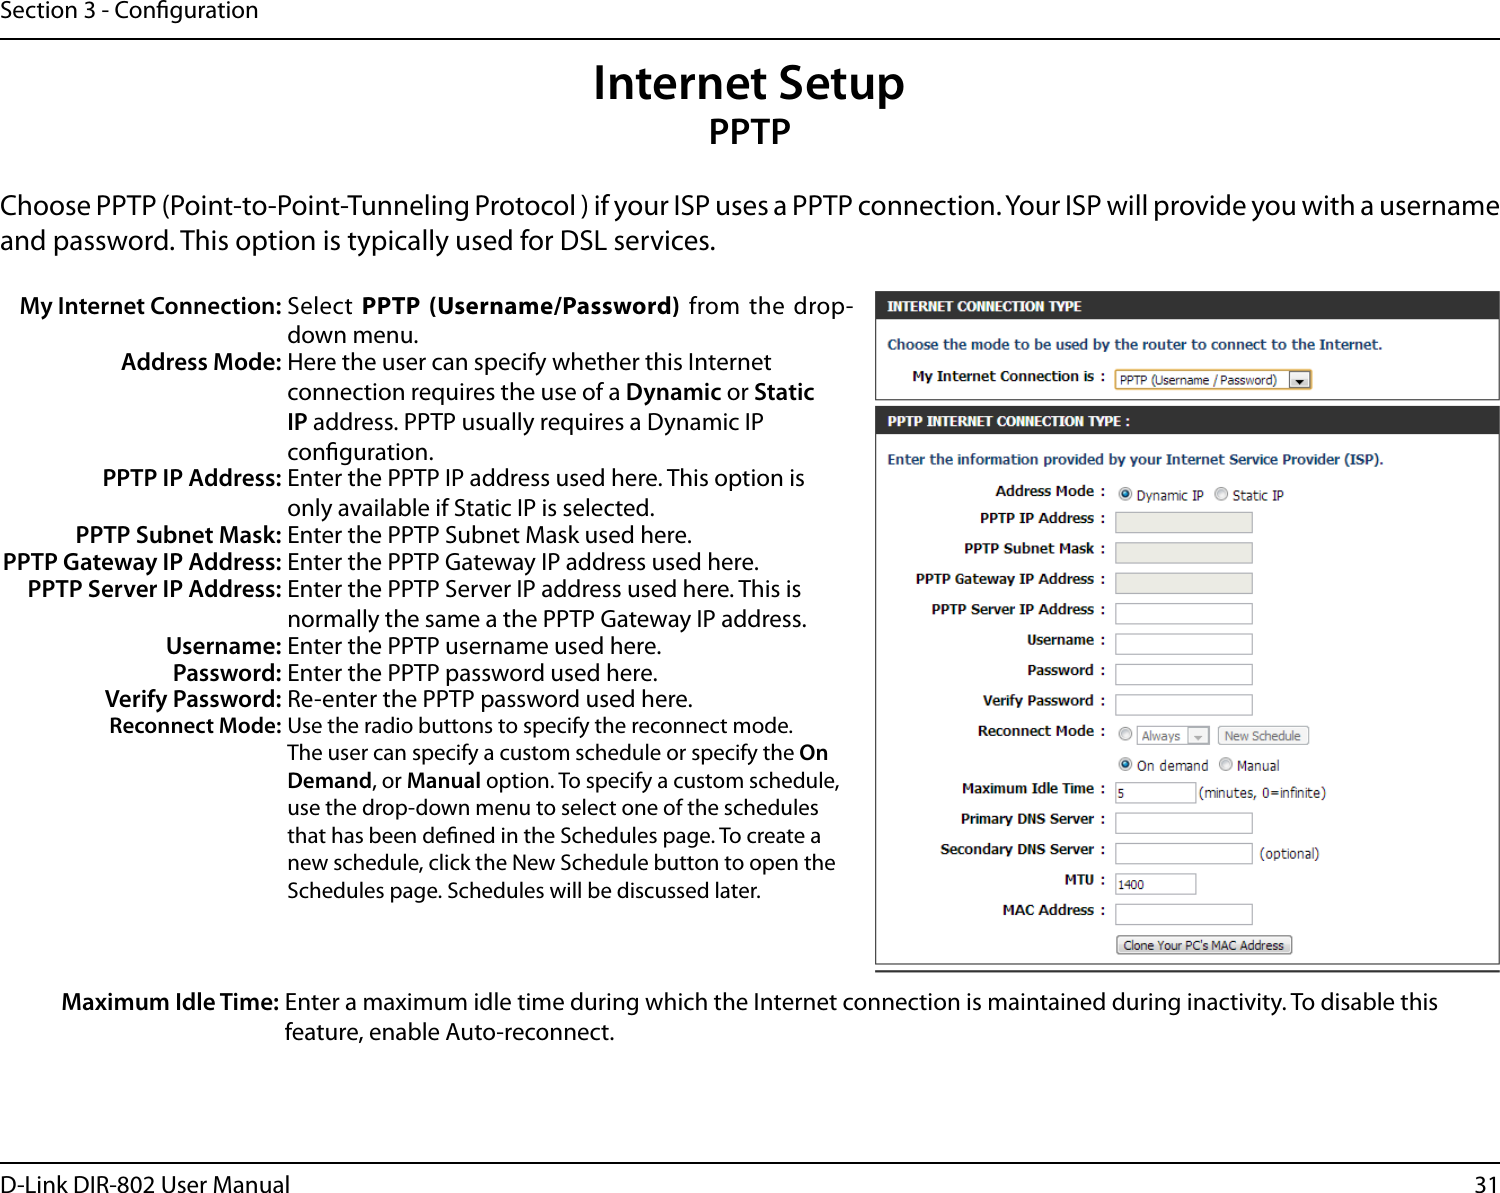 31D-Link DIR-802 User ManualSection 3 - CongurationInternet SetupPPTPChoose PPTP (Point-to-Point-Tunneling Protocol ) if your ISP uses a PPTP connection. Your ISP will provide you with a username and password. This option is typically used for DSL services. My Internet Connection: Select PPTP  (Username/Password) from the drop-down menu.Address Mode: Here the user can specify whether this Internet connection requires the use of a Dynamic or Static IP address. PPTP usually requires a Dynamic IP conguration.PPTP IP Address: Enter the PPTP IP address used here. This option is only available if Static IP is selected.PPTP Subnet Mask: Enter the PPTP Subnet Mask used here.PPTP Gateway IP Address: Enter the PPTP Gateway IP address used here.PPTP Server IP Address: Enter the PPTP Server IP address used here. This is normally the same a the PPTP Gateway IP address.Username: Enter the PPTP username used here.Password: Enter the PPTP password used here.Verify Password: Re-enter the PPTP password used here.Reconnect Mode: Use the radio buttons to specify the reconnect mode. The user can specify a custom schedule or specify the On Demand, or Manual option. To specify a custom schedule, use the drop-down menu to select one of the schedules that has been dened in the Schedules page. To create a new schedule, click the New Schedule button to open the Schedules page. Schedules will be discussed later.Maximum Idle Time: Enter a maximum idle time during which the Internet connection is maintained during inactivity. To disable this feature, enable Auto-reconnect.